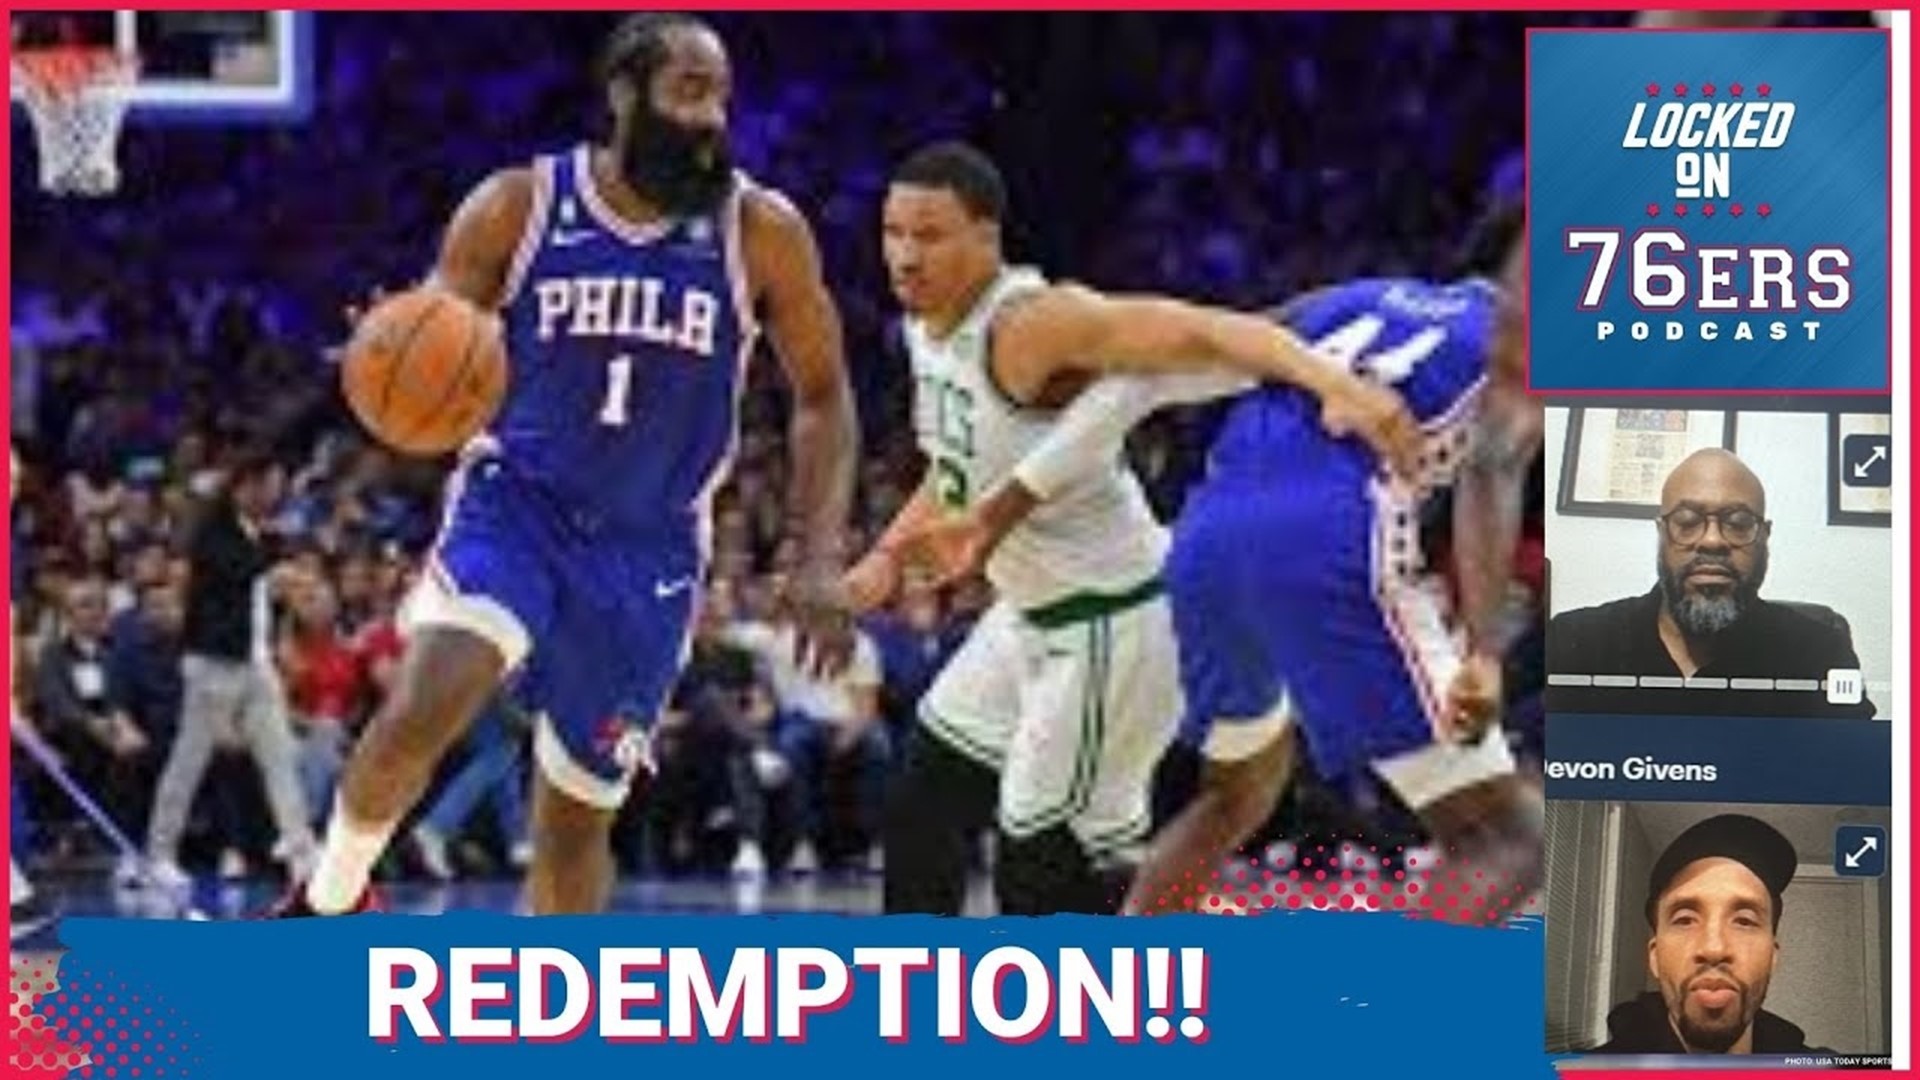 James Harden scored 42 points to lead the 76ers to a 116-115 overtime victory over the  Boston Celtics in Game 4 of the Eastern Conference semifinals series